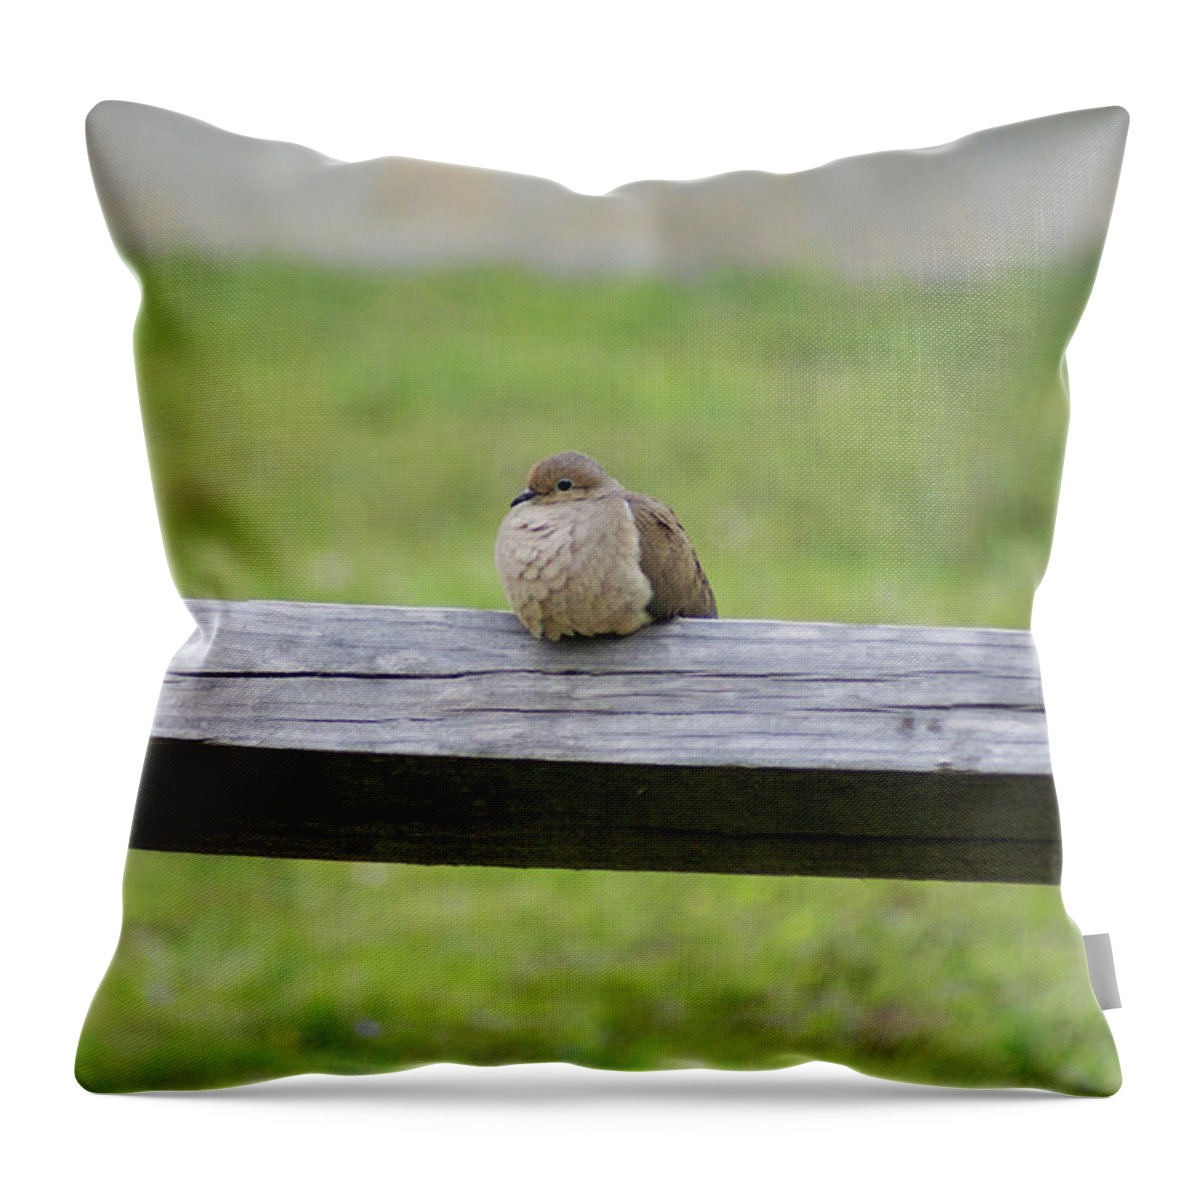  Throw Pillow featuring the photograph Resting Dove by Heather E Harman